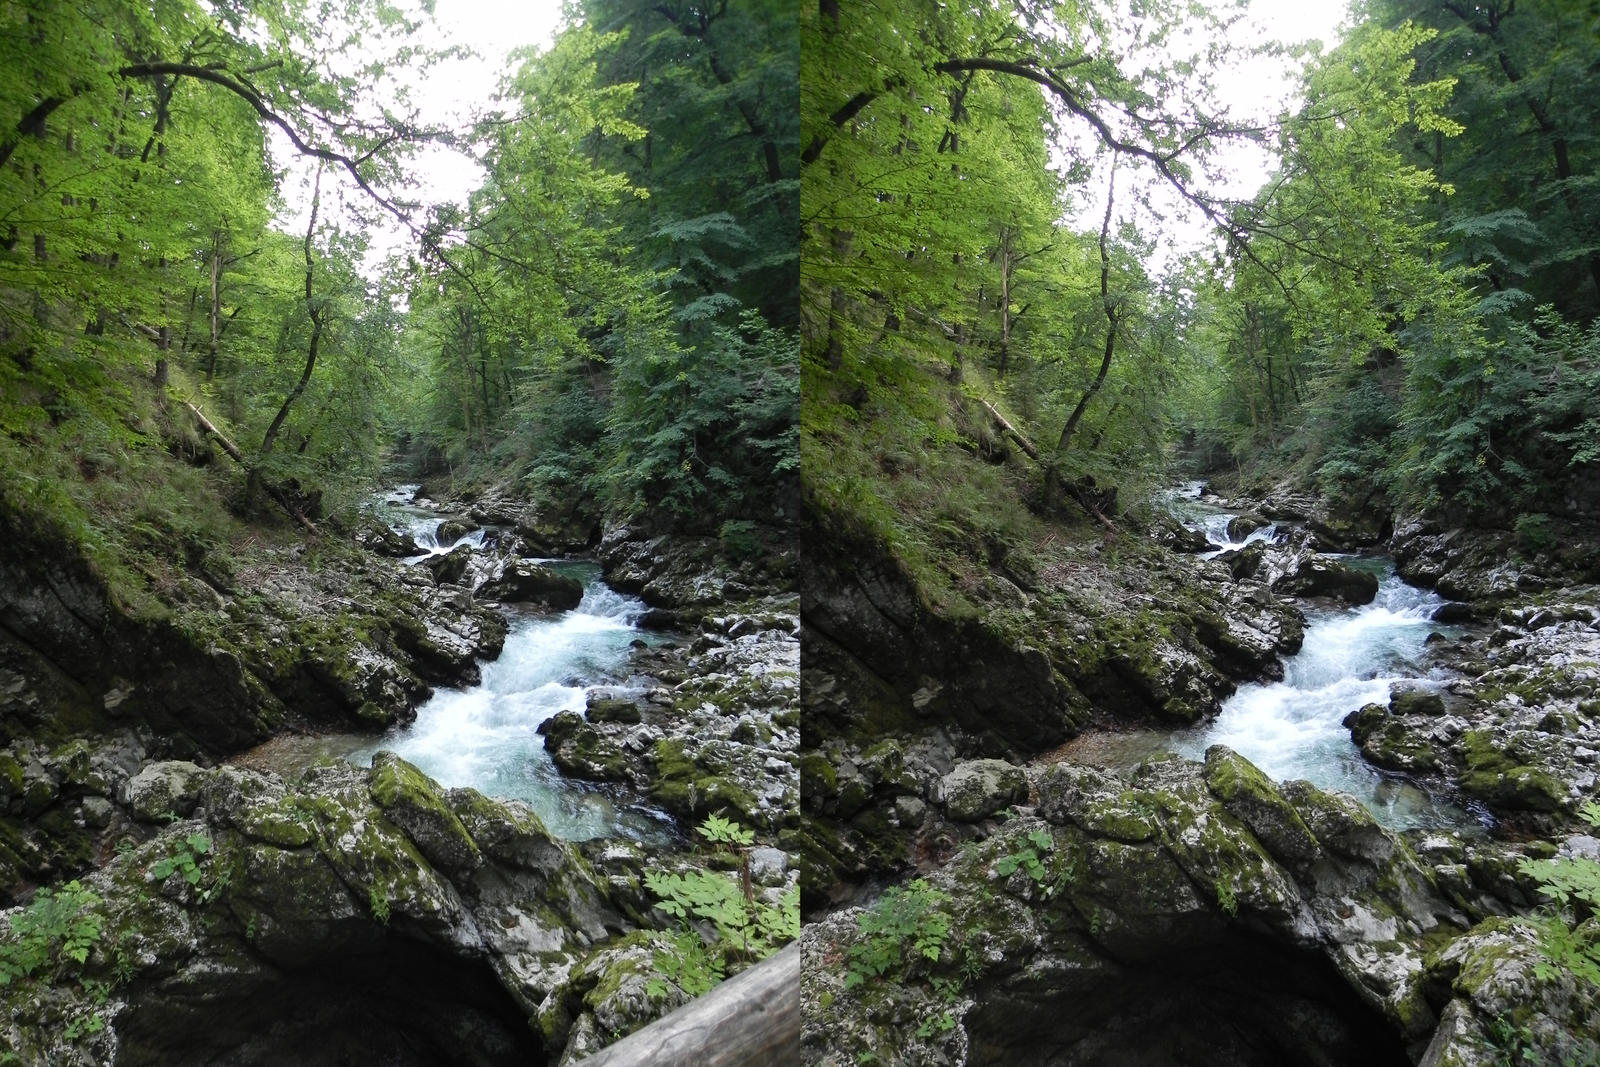 Stereoscopic stone hole at the river